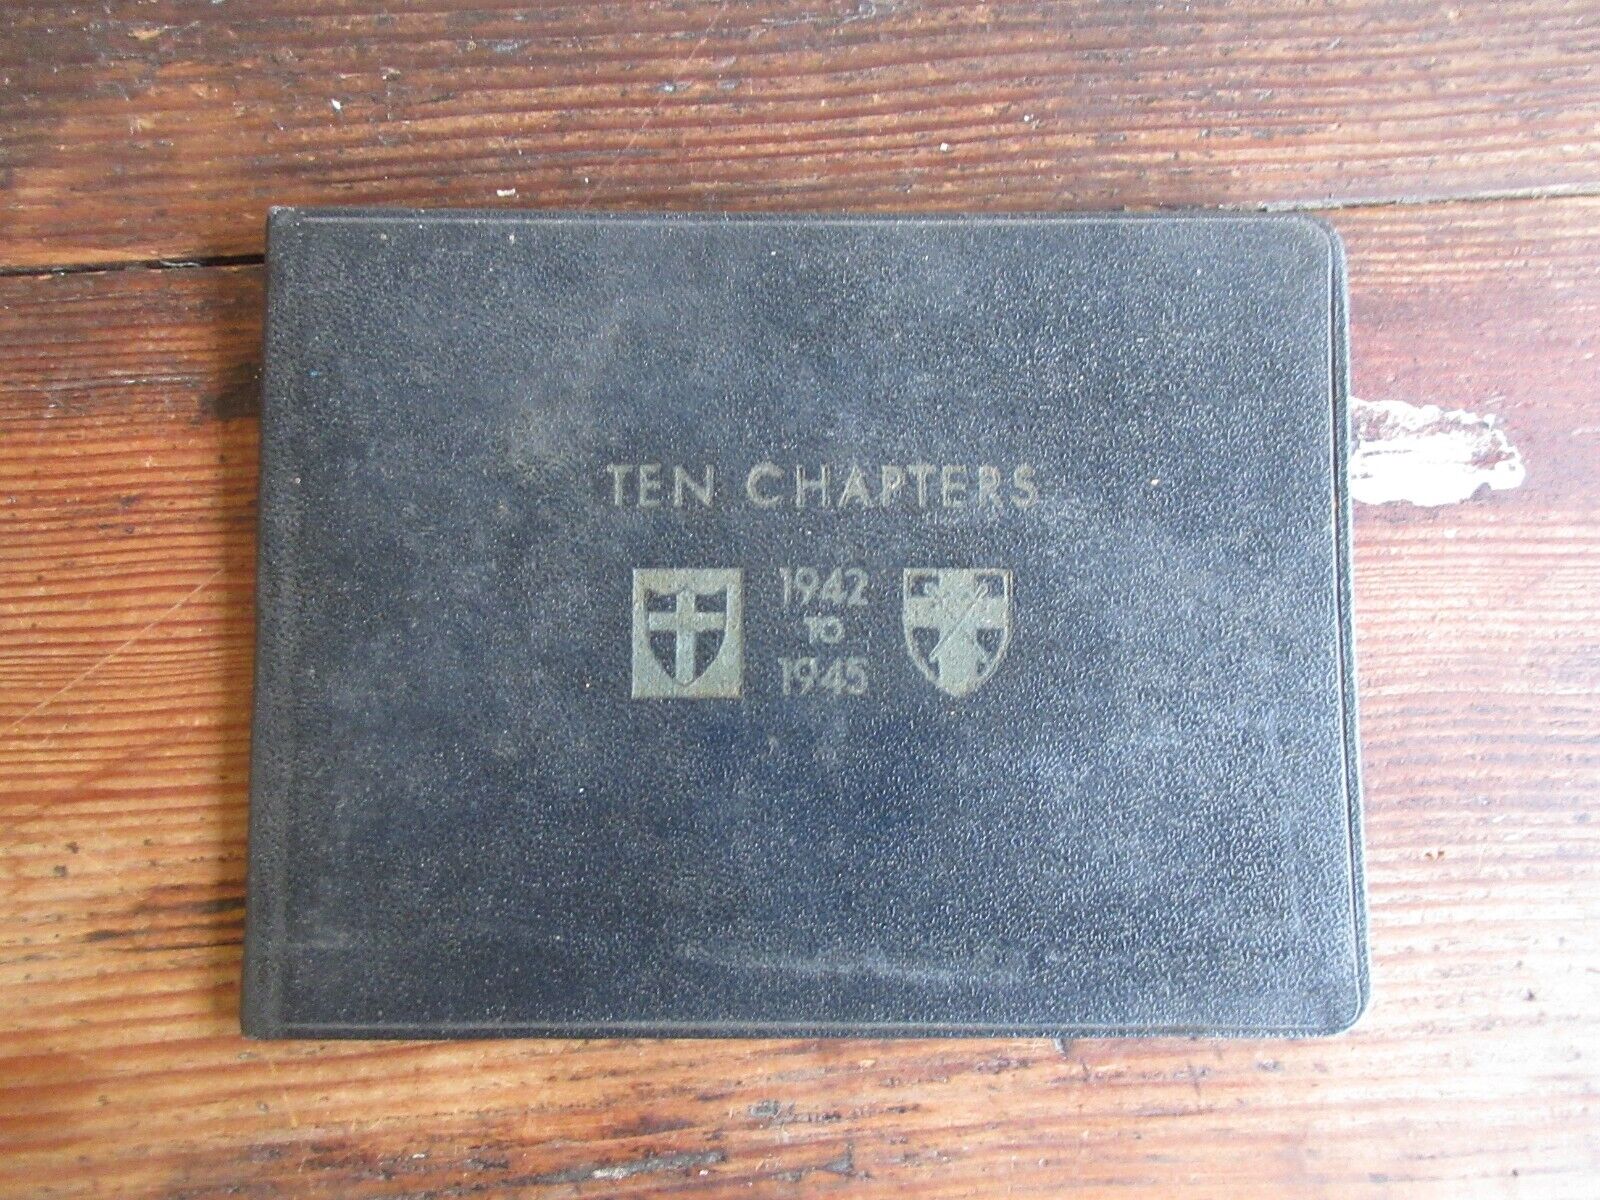 TEN CHAPTERS 1942 TO 1945 REPRO OF A PERSONAL RECORD OF B.L. MONTGOMERY WWII